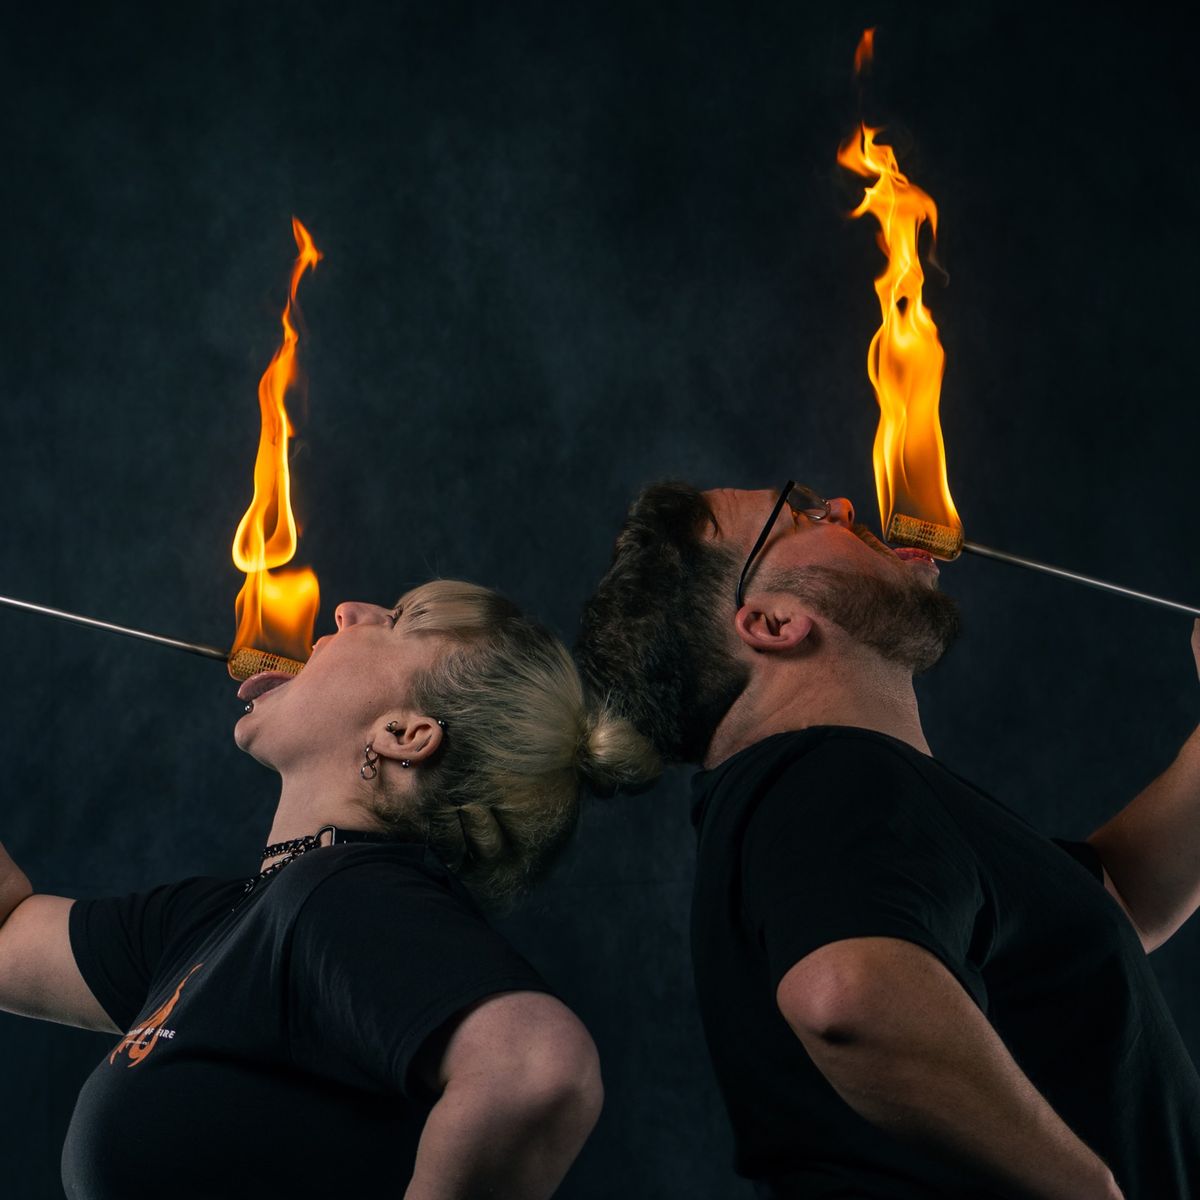 Manchester Fire Manipulation Workshop - Learn Fire Eating & More! - Beginners Welcome!